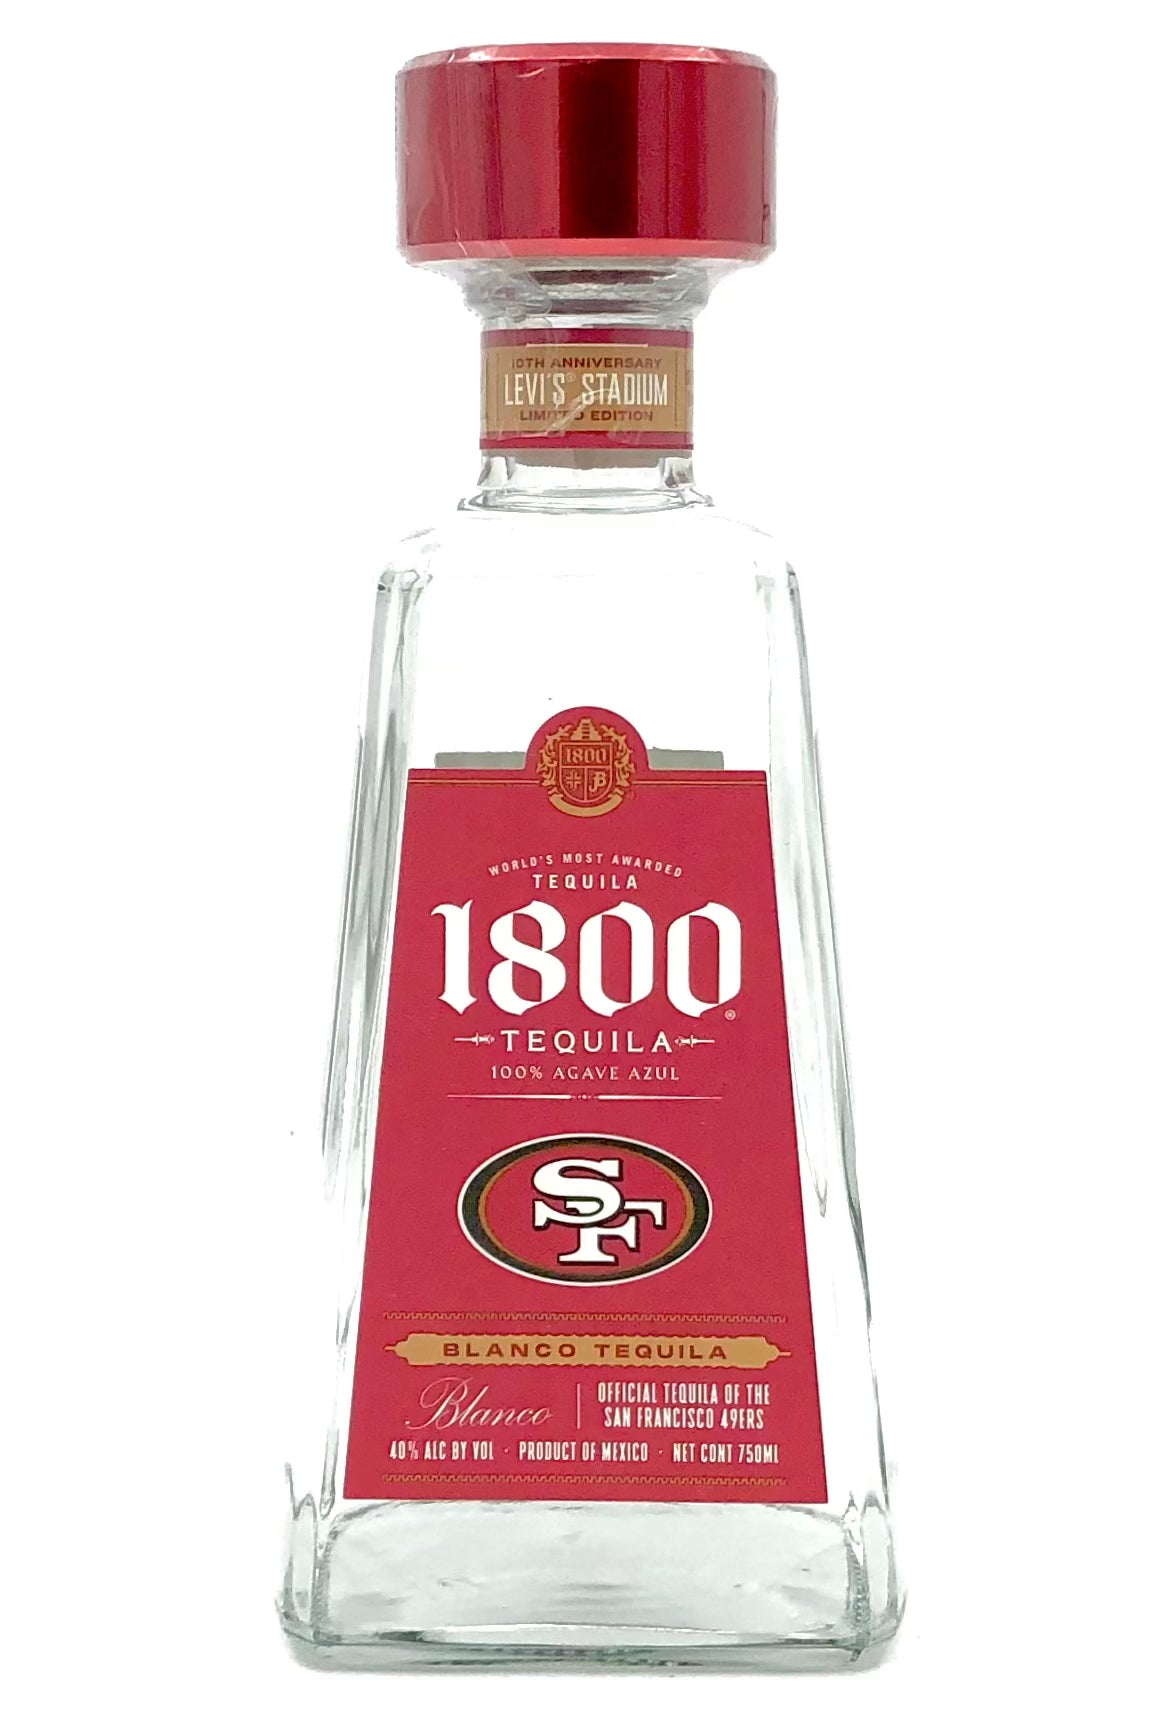 Buy 49er 1800 Blanco Tequila Official Tequila of the 49ers! Online